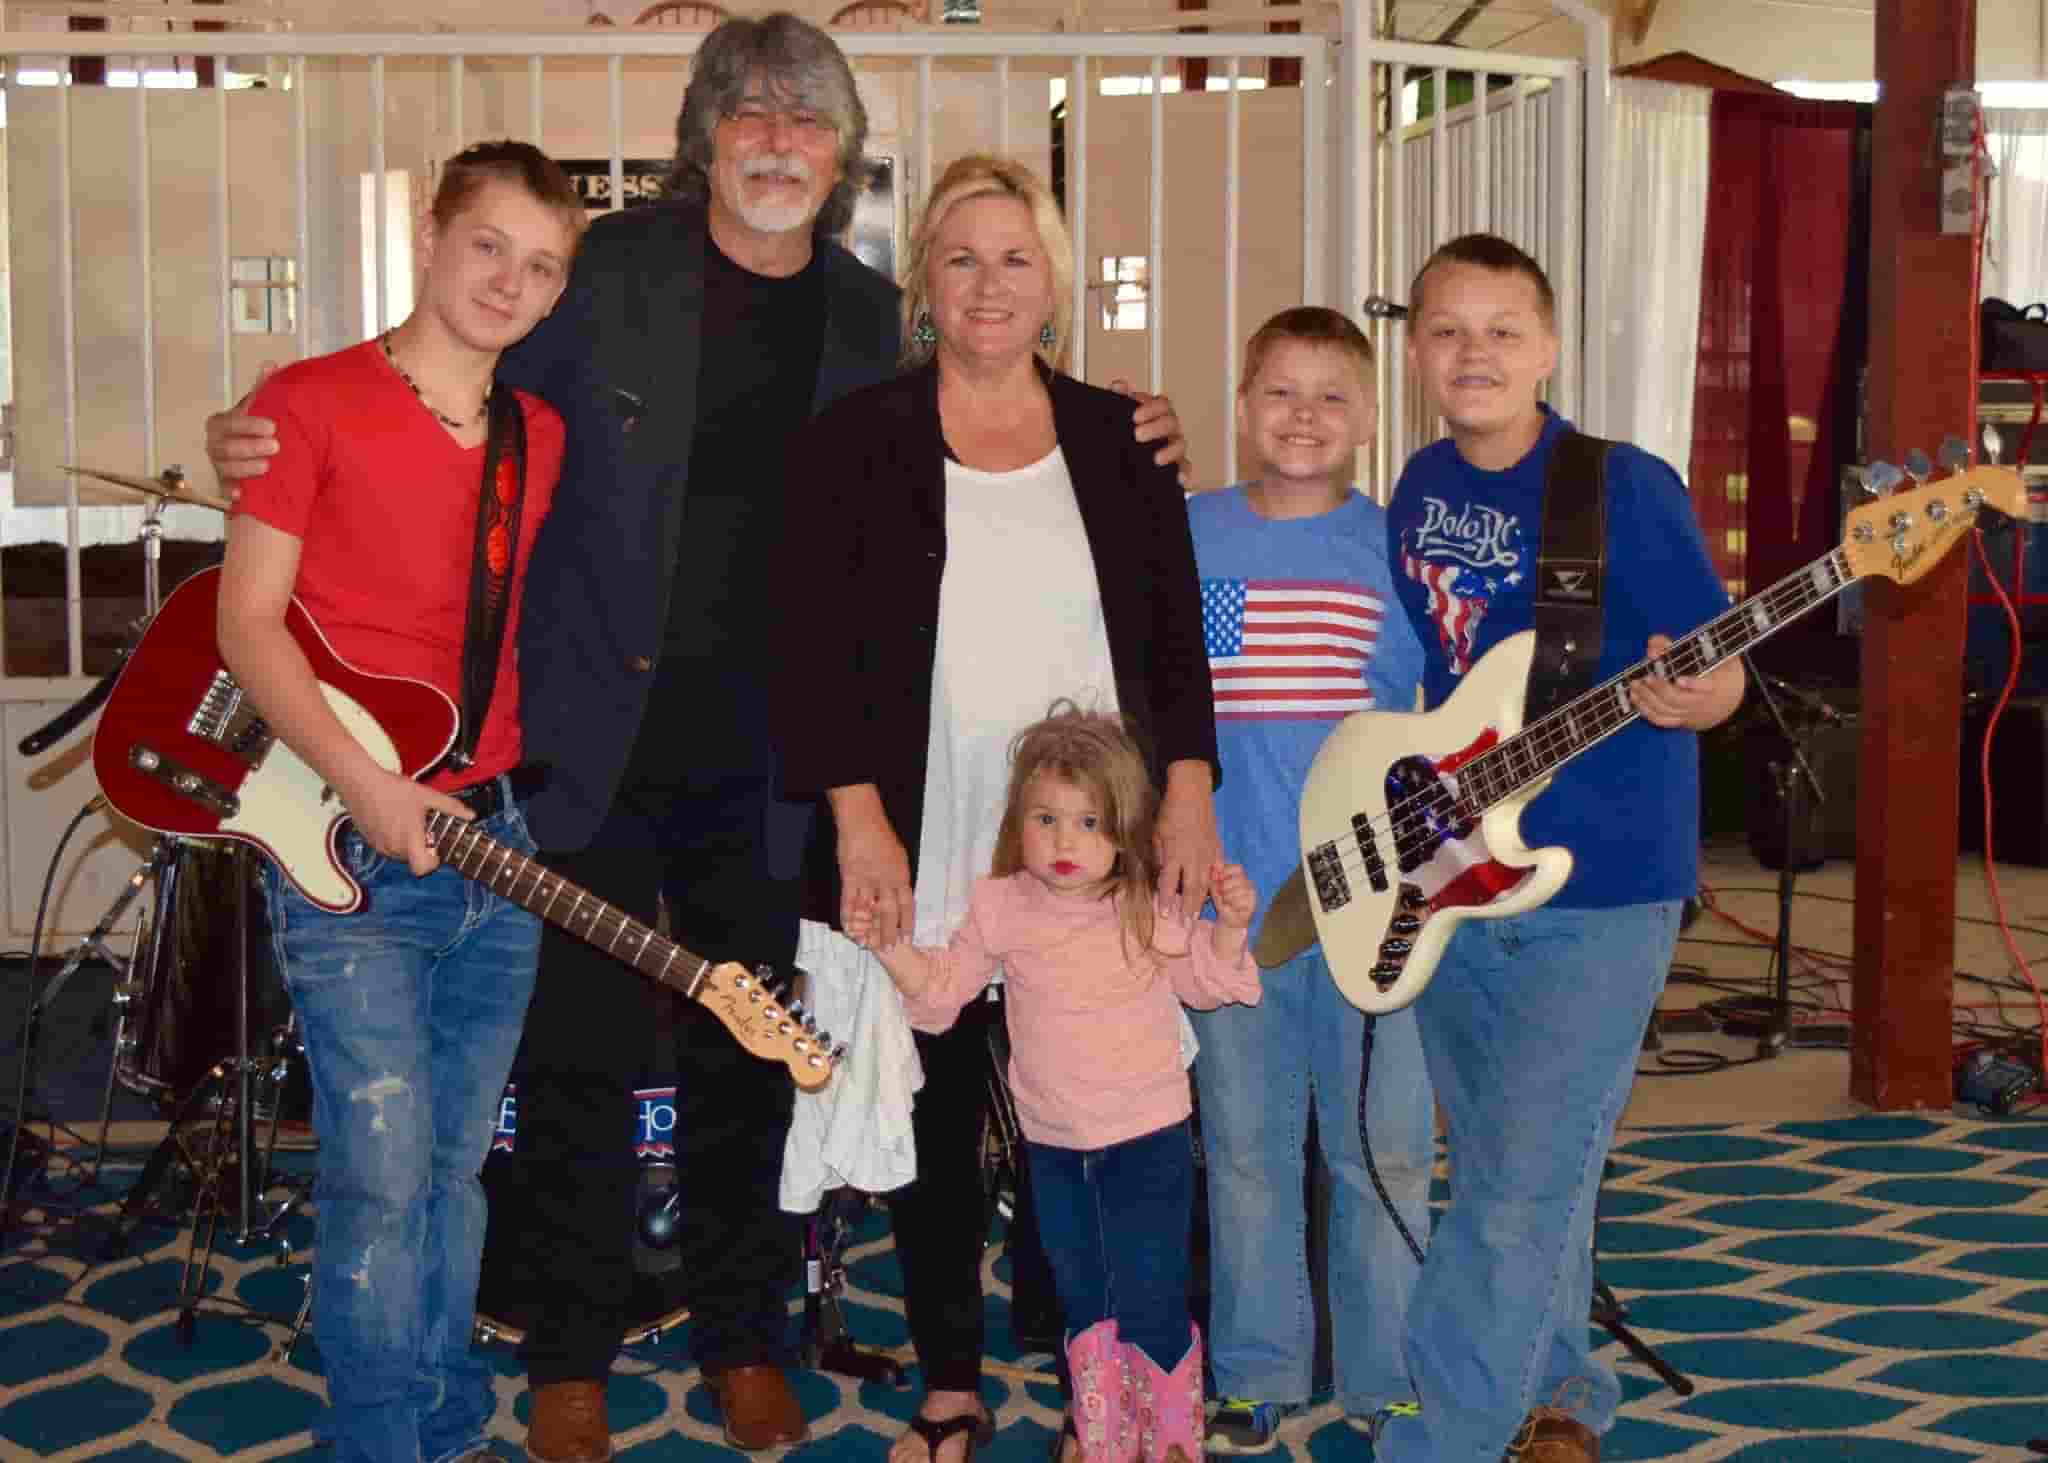 Image of Randy Owen with his wife, Kelly Owen, and their kids, Alison Sena Yeuell, Heath Yeuell, and Randa Rosanne Yeuell.